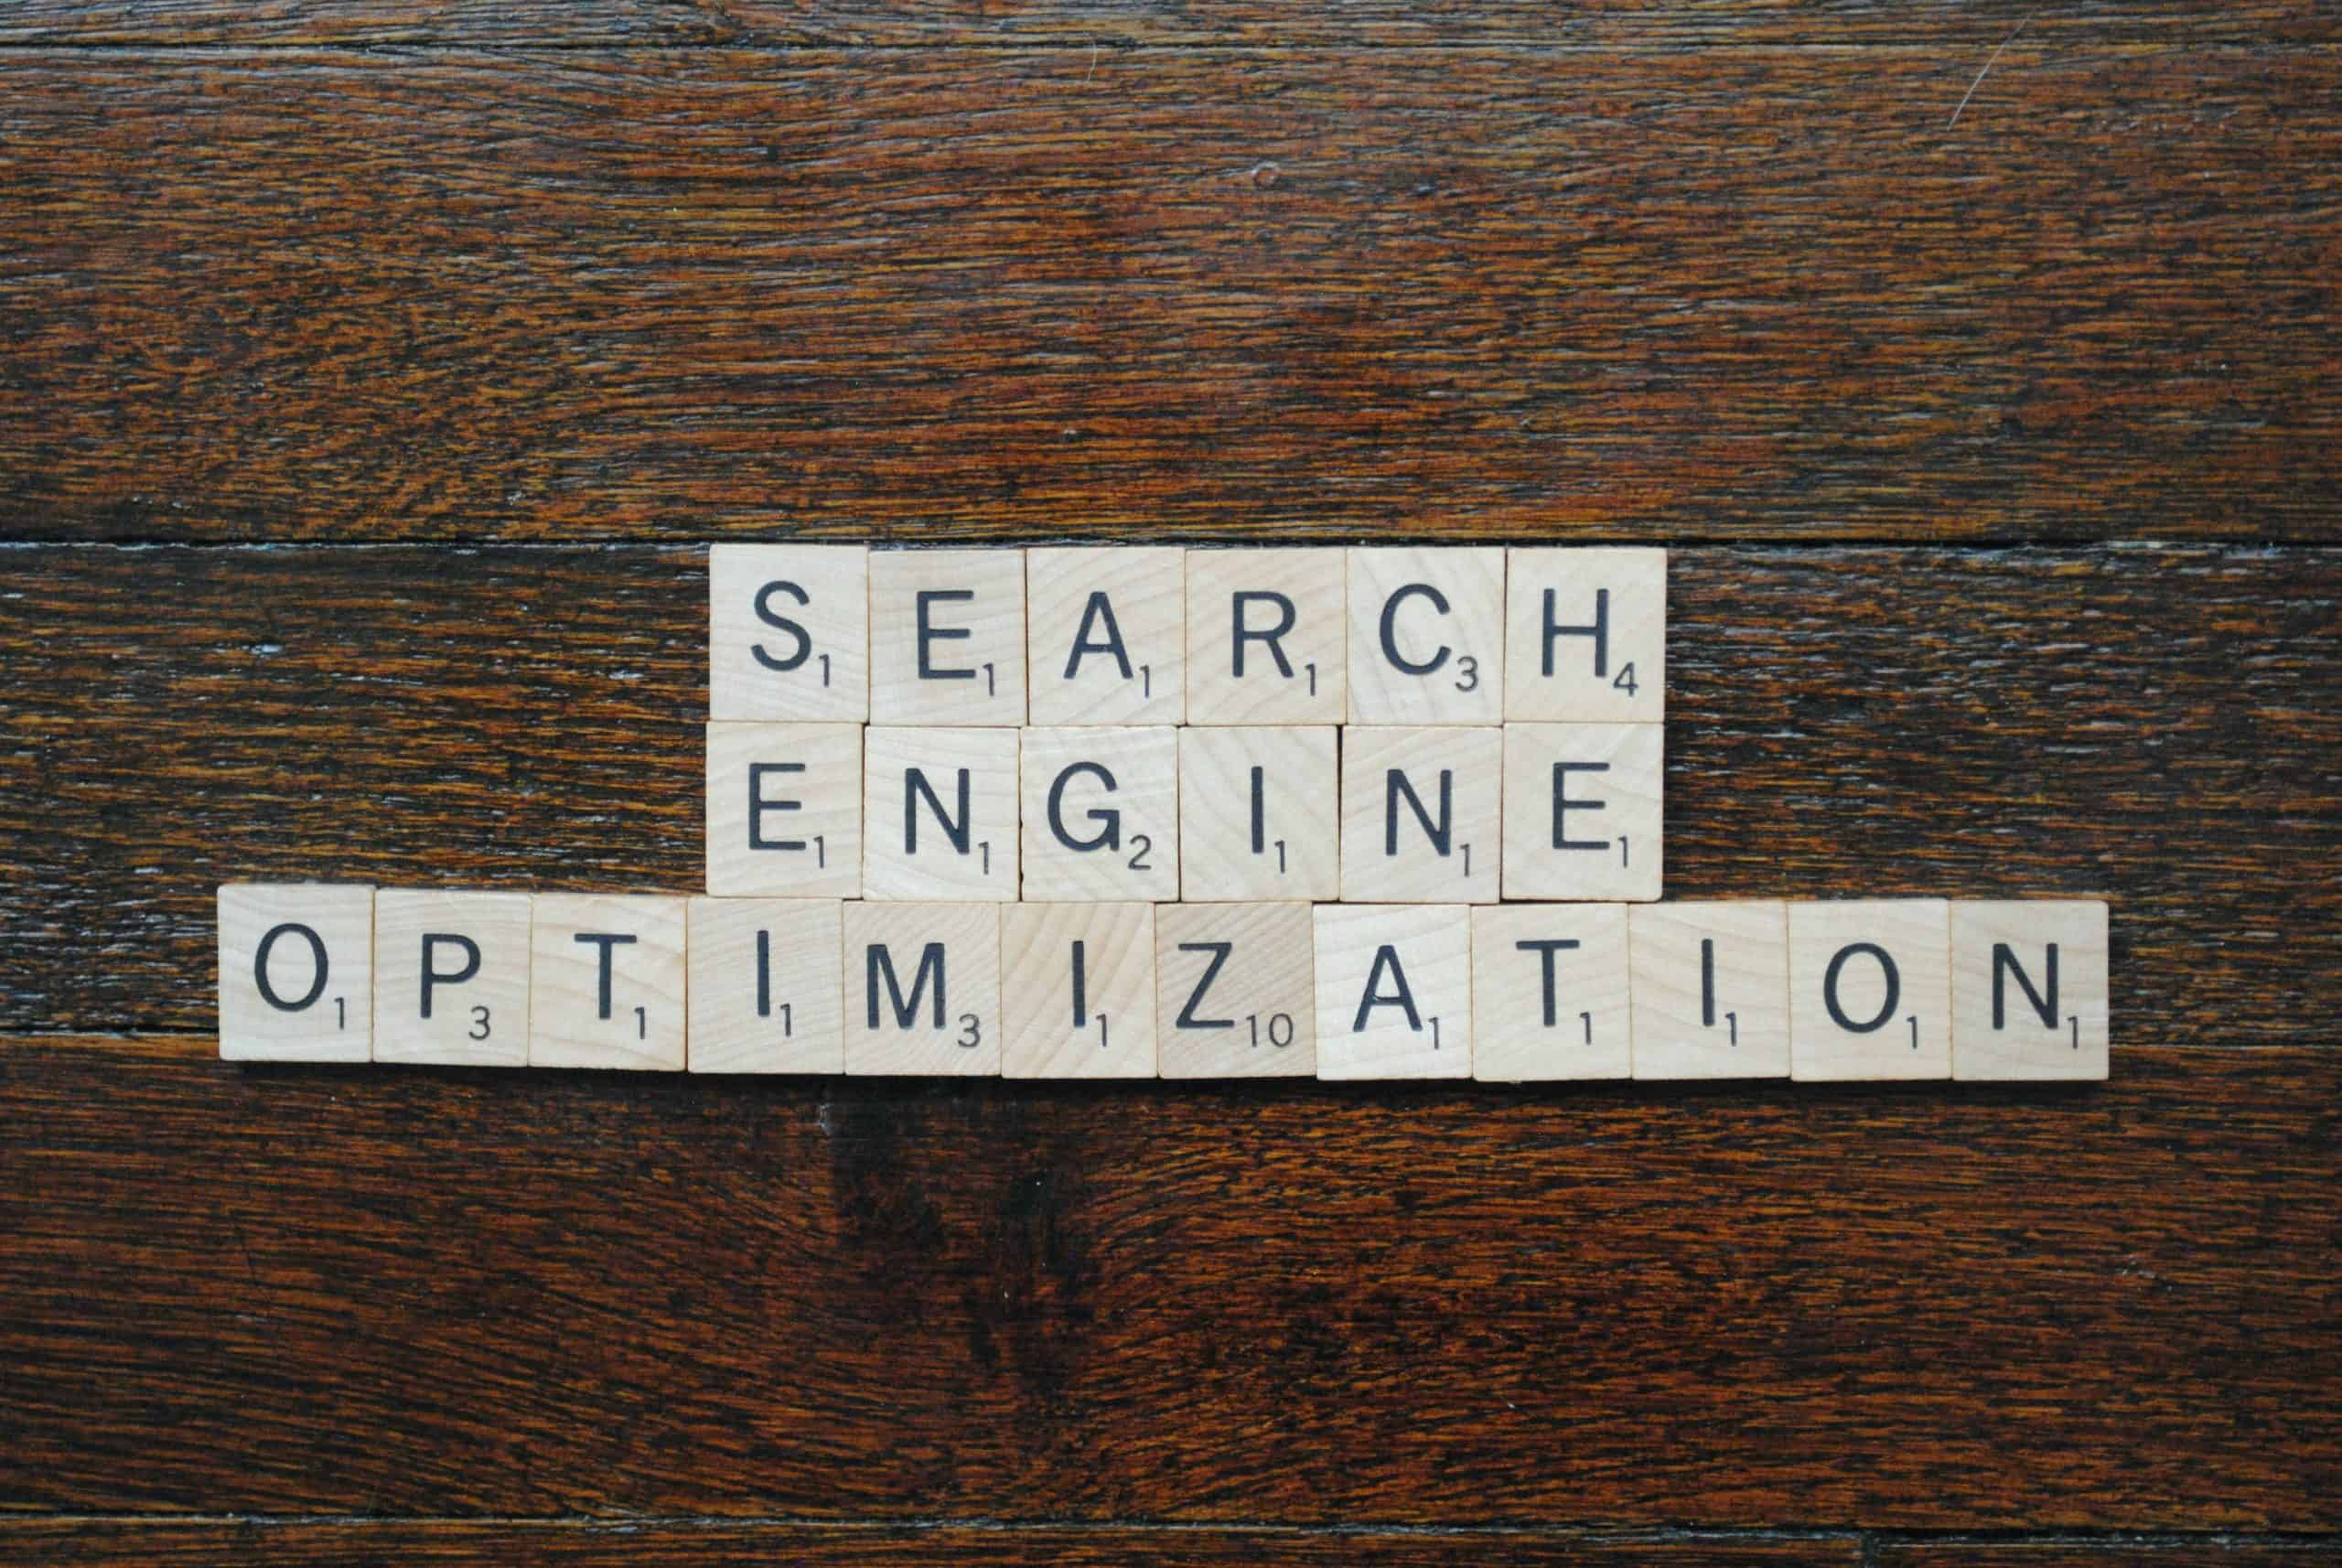 Search Engine Optimization written out in scrabble pieces